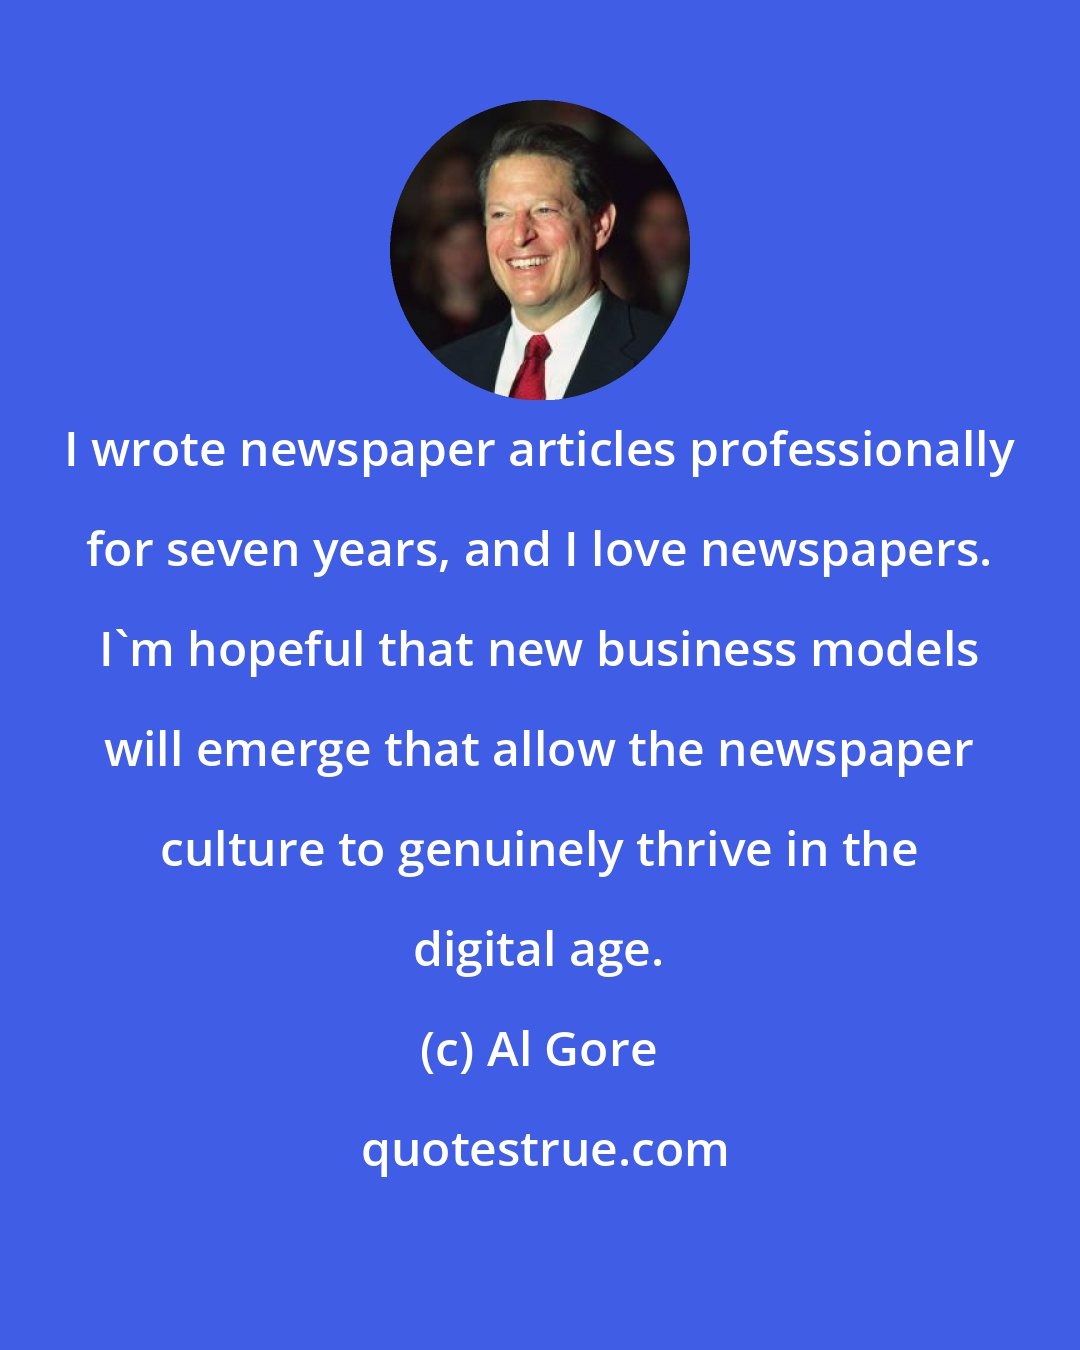 Al Gore: I wrote newspaper articles professionally for seven years, and I love newspapers. I'm hopeful that new business models will emerge that allow the newspaper culture to genuinely thrive in the digital age.